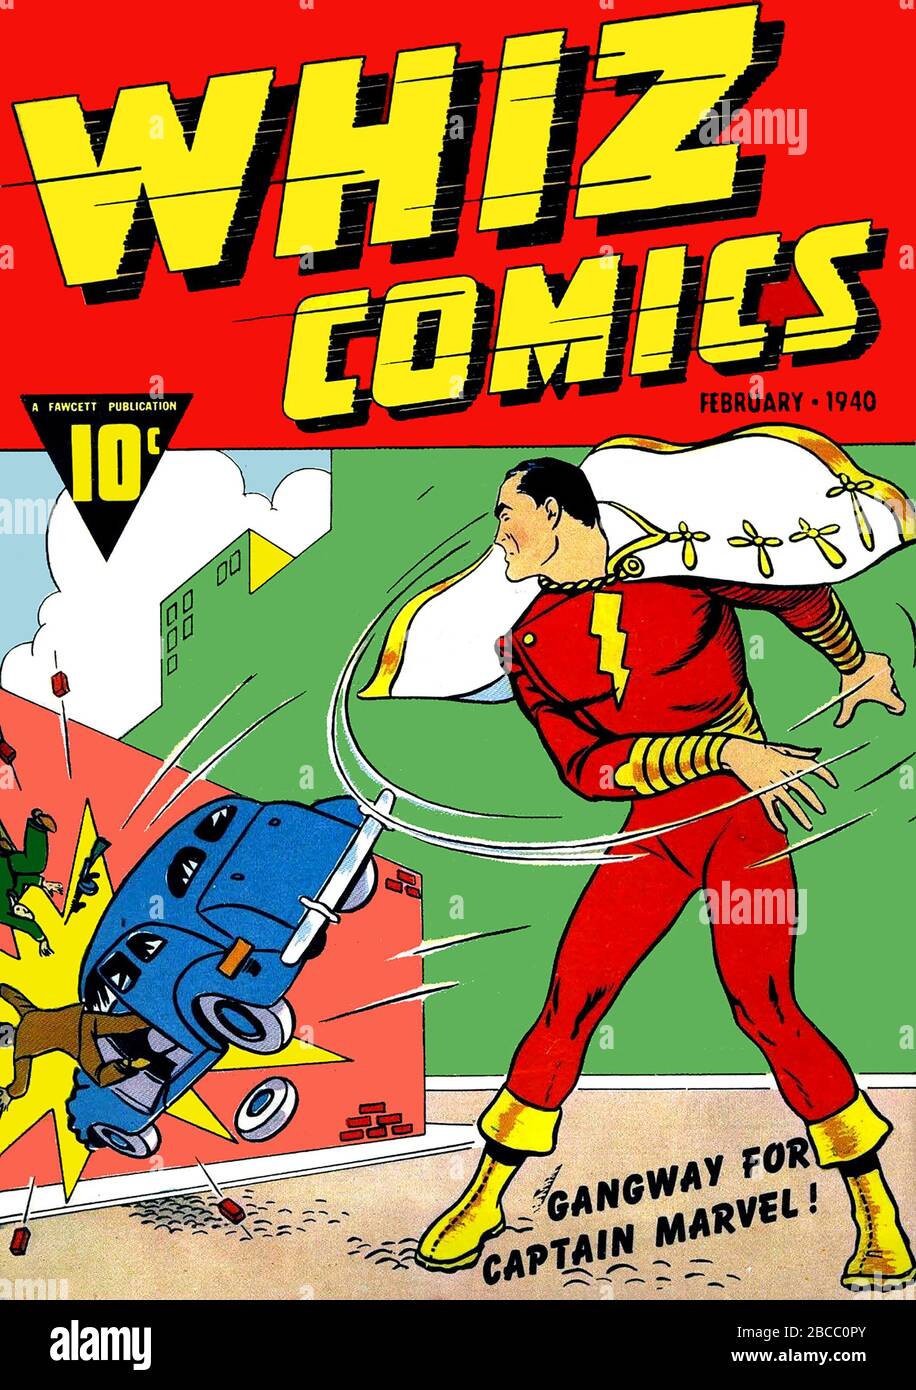 CAPTAIN MARVEL First appearance was in Whiz Comics February 1940 Stock Photo